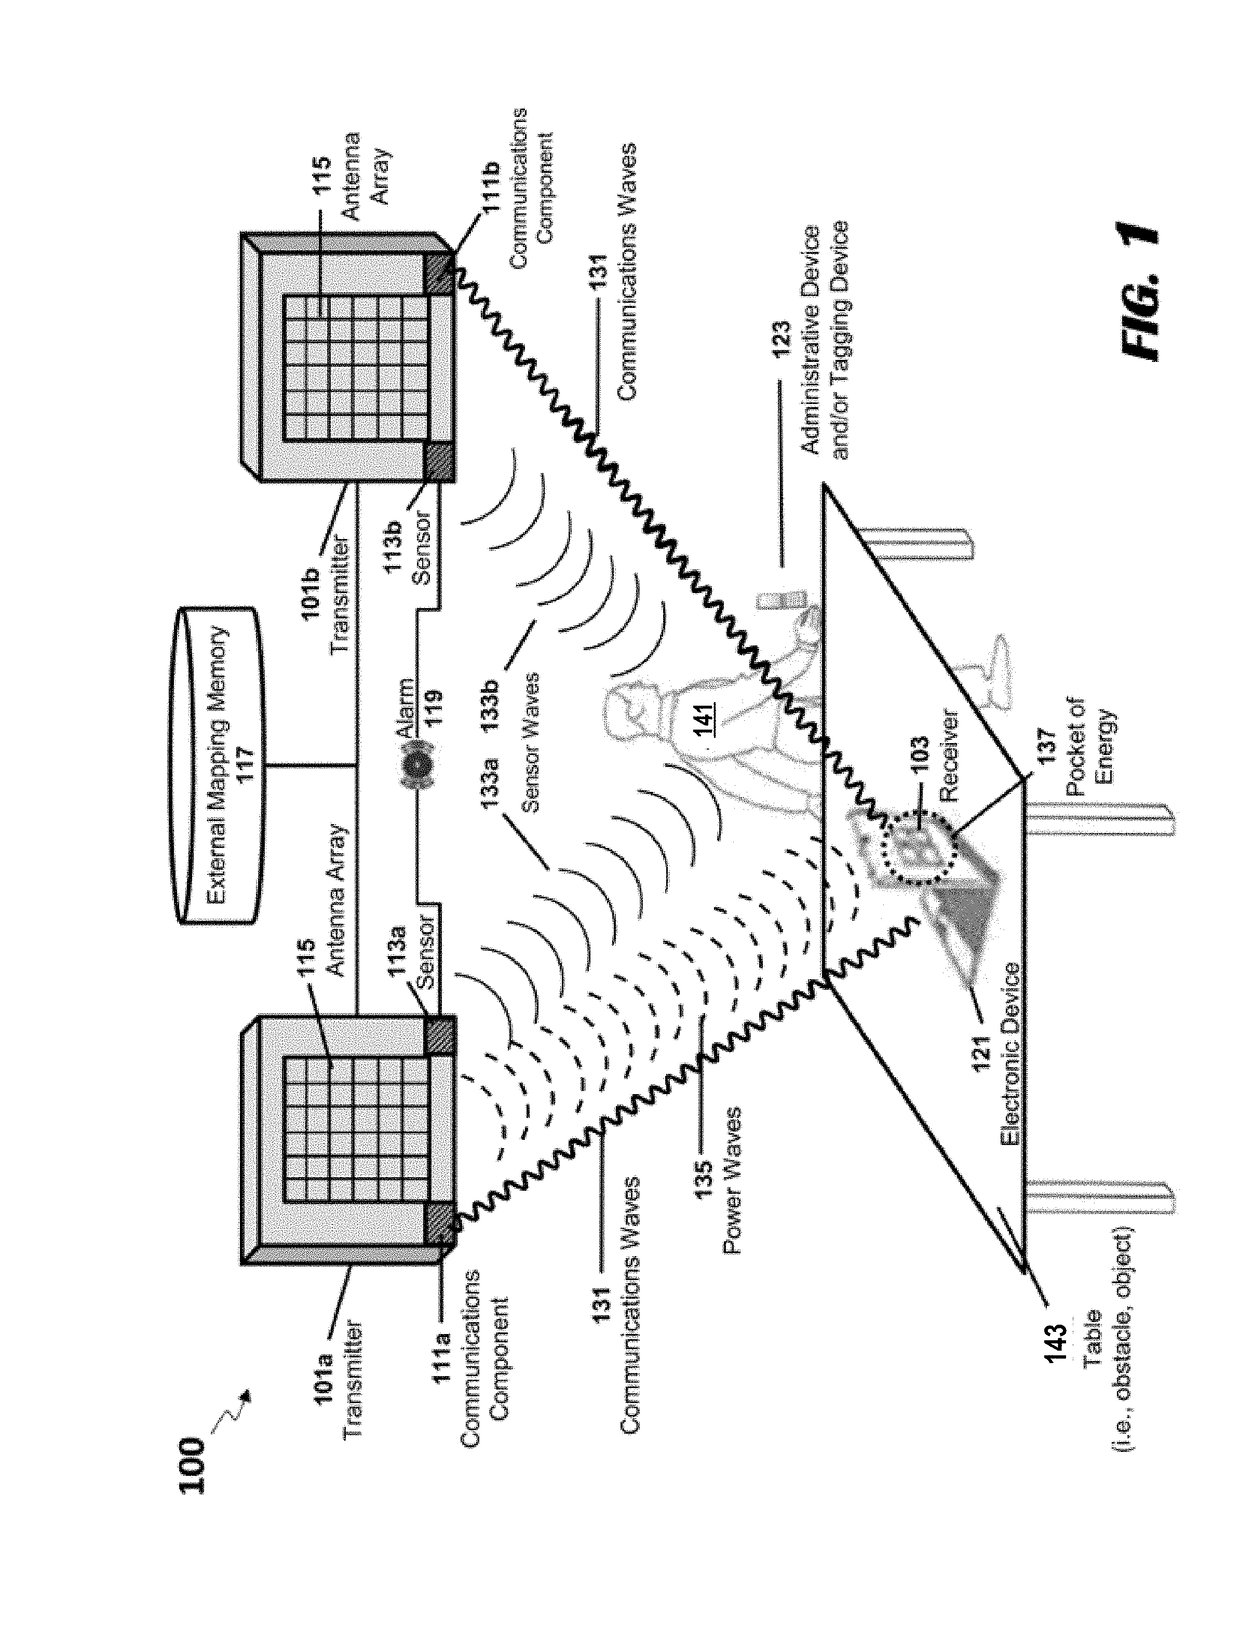 Systems and methods for preconfiguring transmission devices for power wave transmissions based on location data of one or more receivers